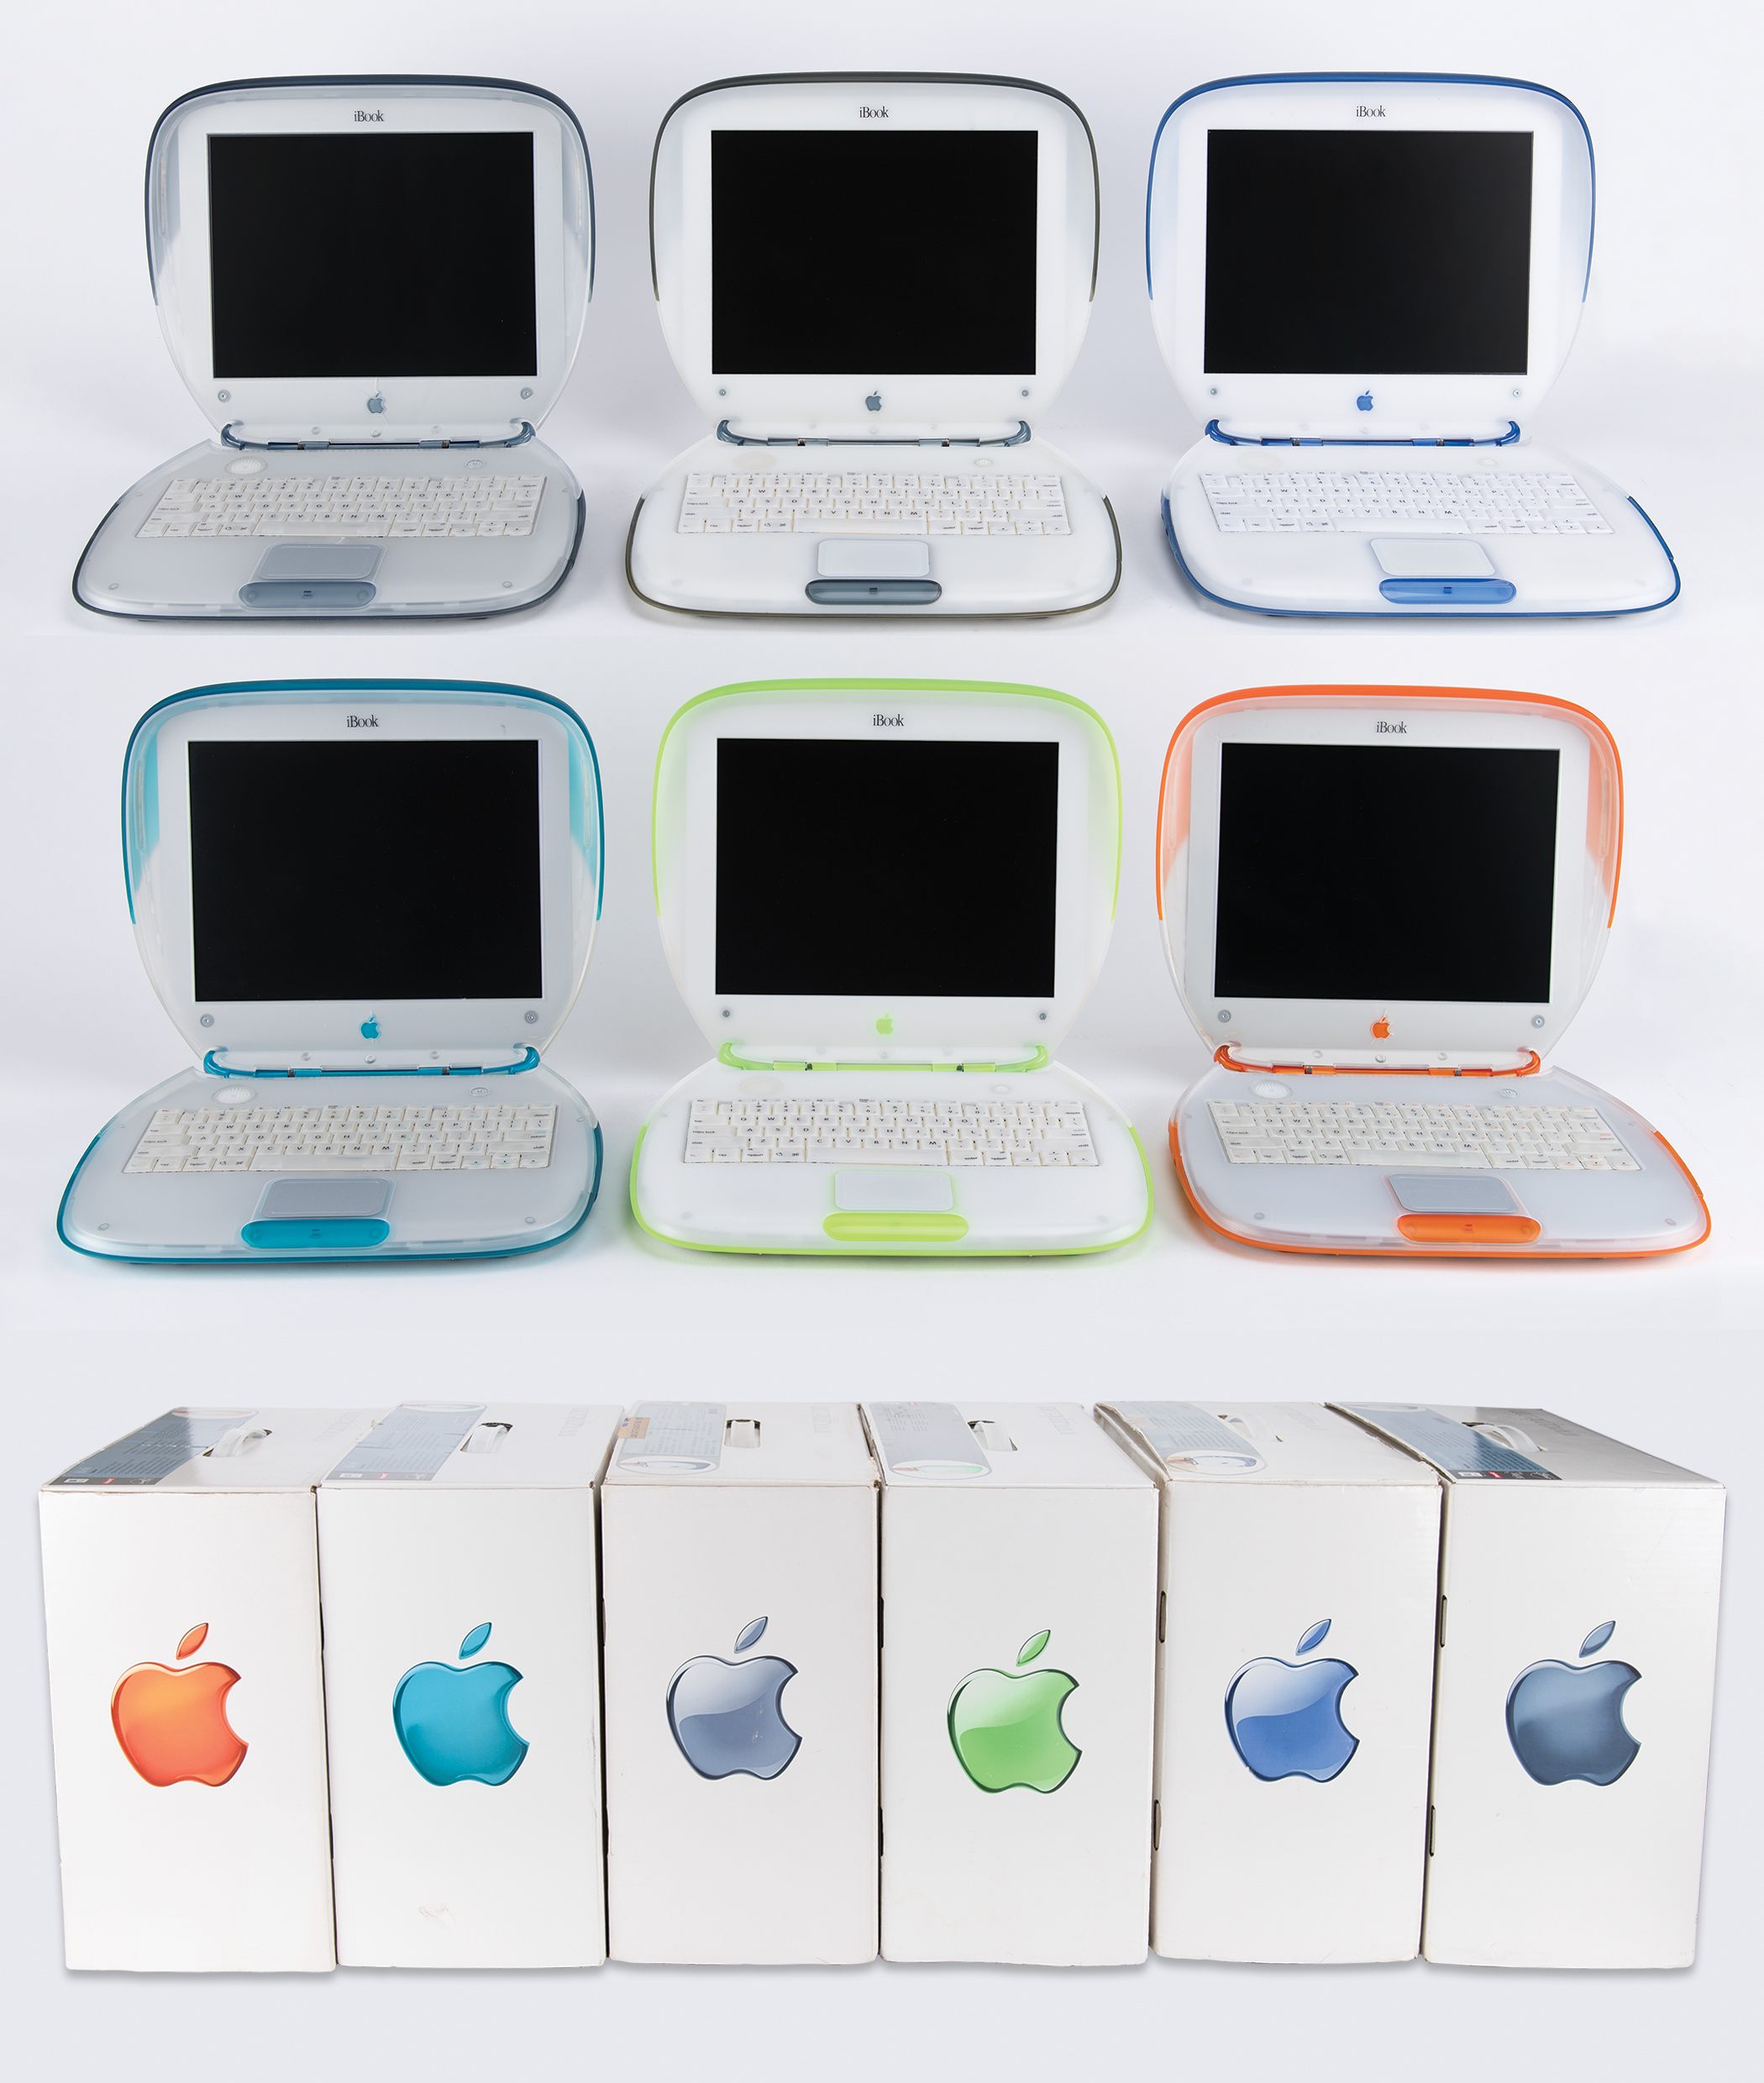 Lot #3042 Apple iBook G3 Laptops (6) in All Colors (with Boxes): Blueberry, Tangerine, Graphite, Indigo, and Key Lime - Image 1